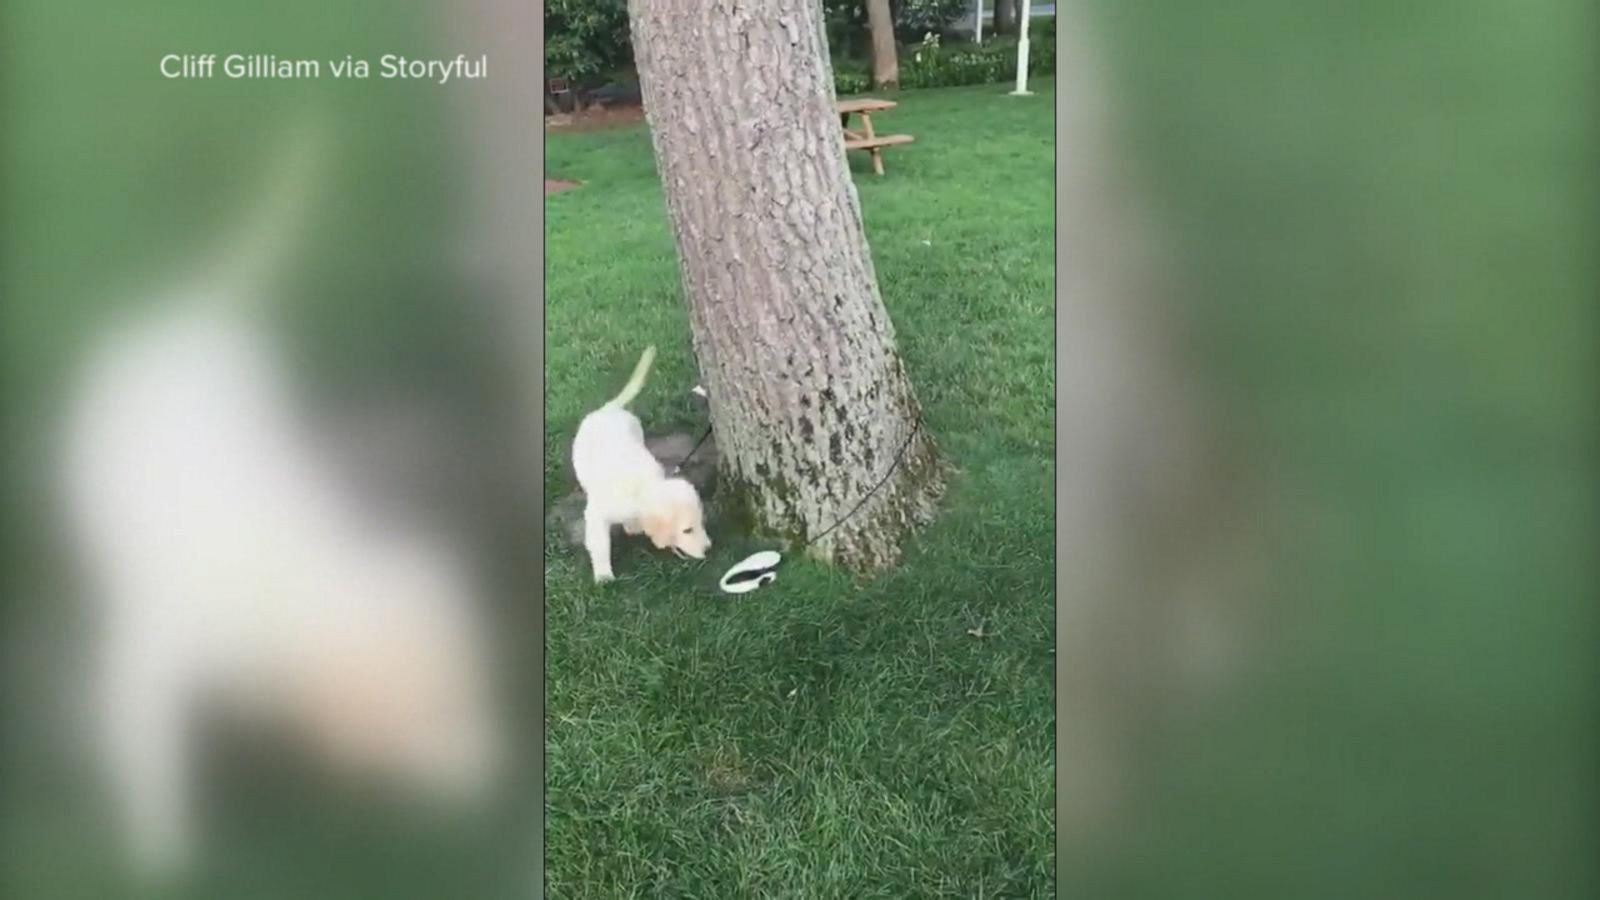 VIDEO: Dog chases retractable leash around a tree